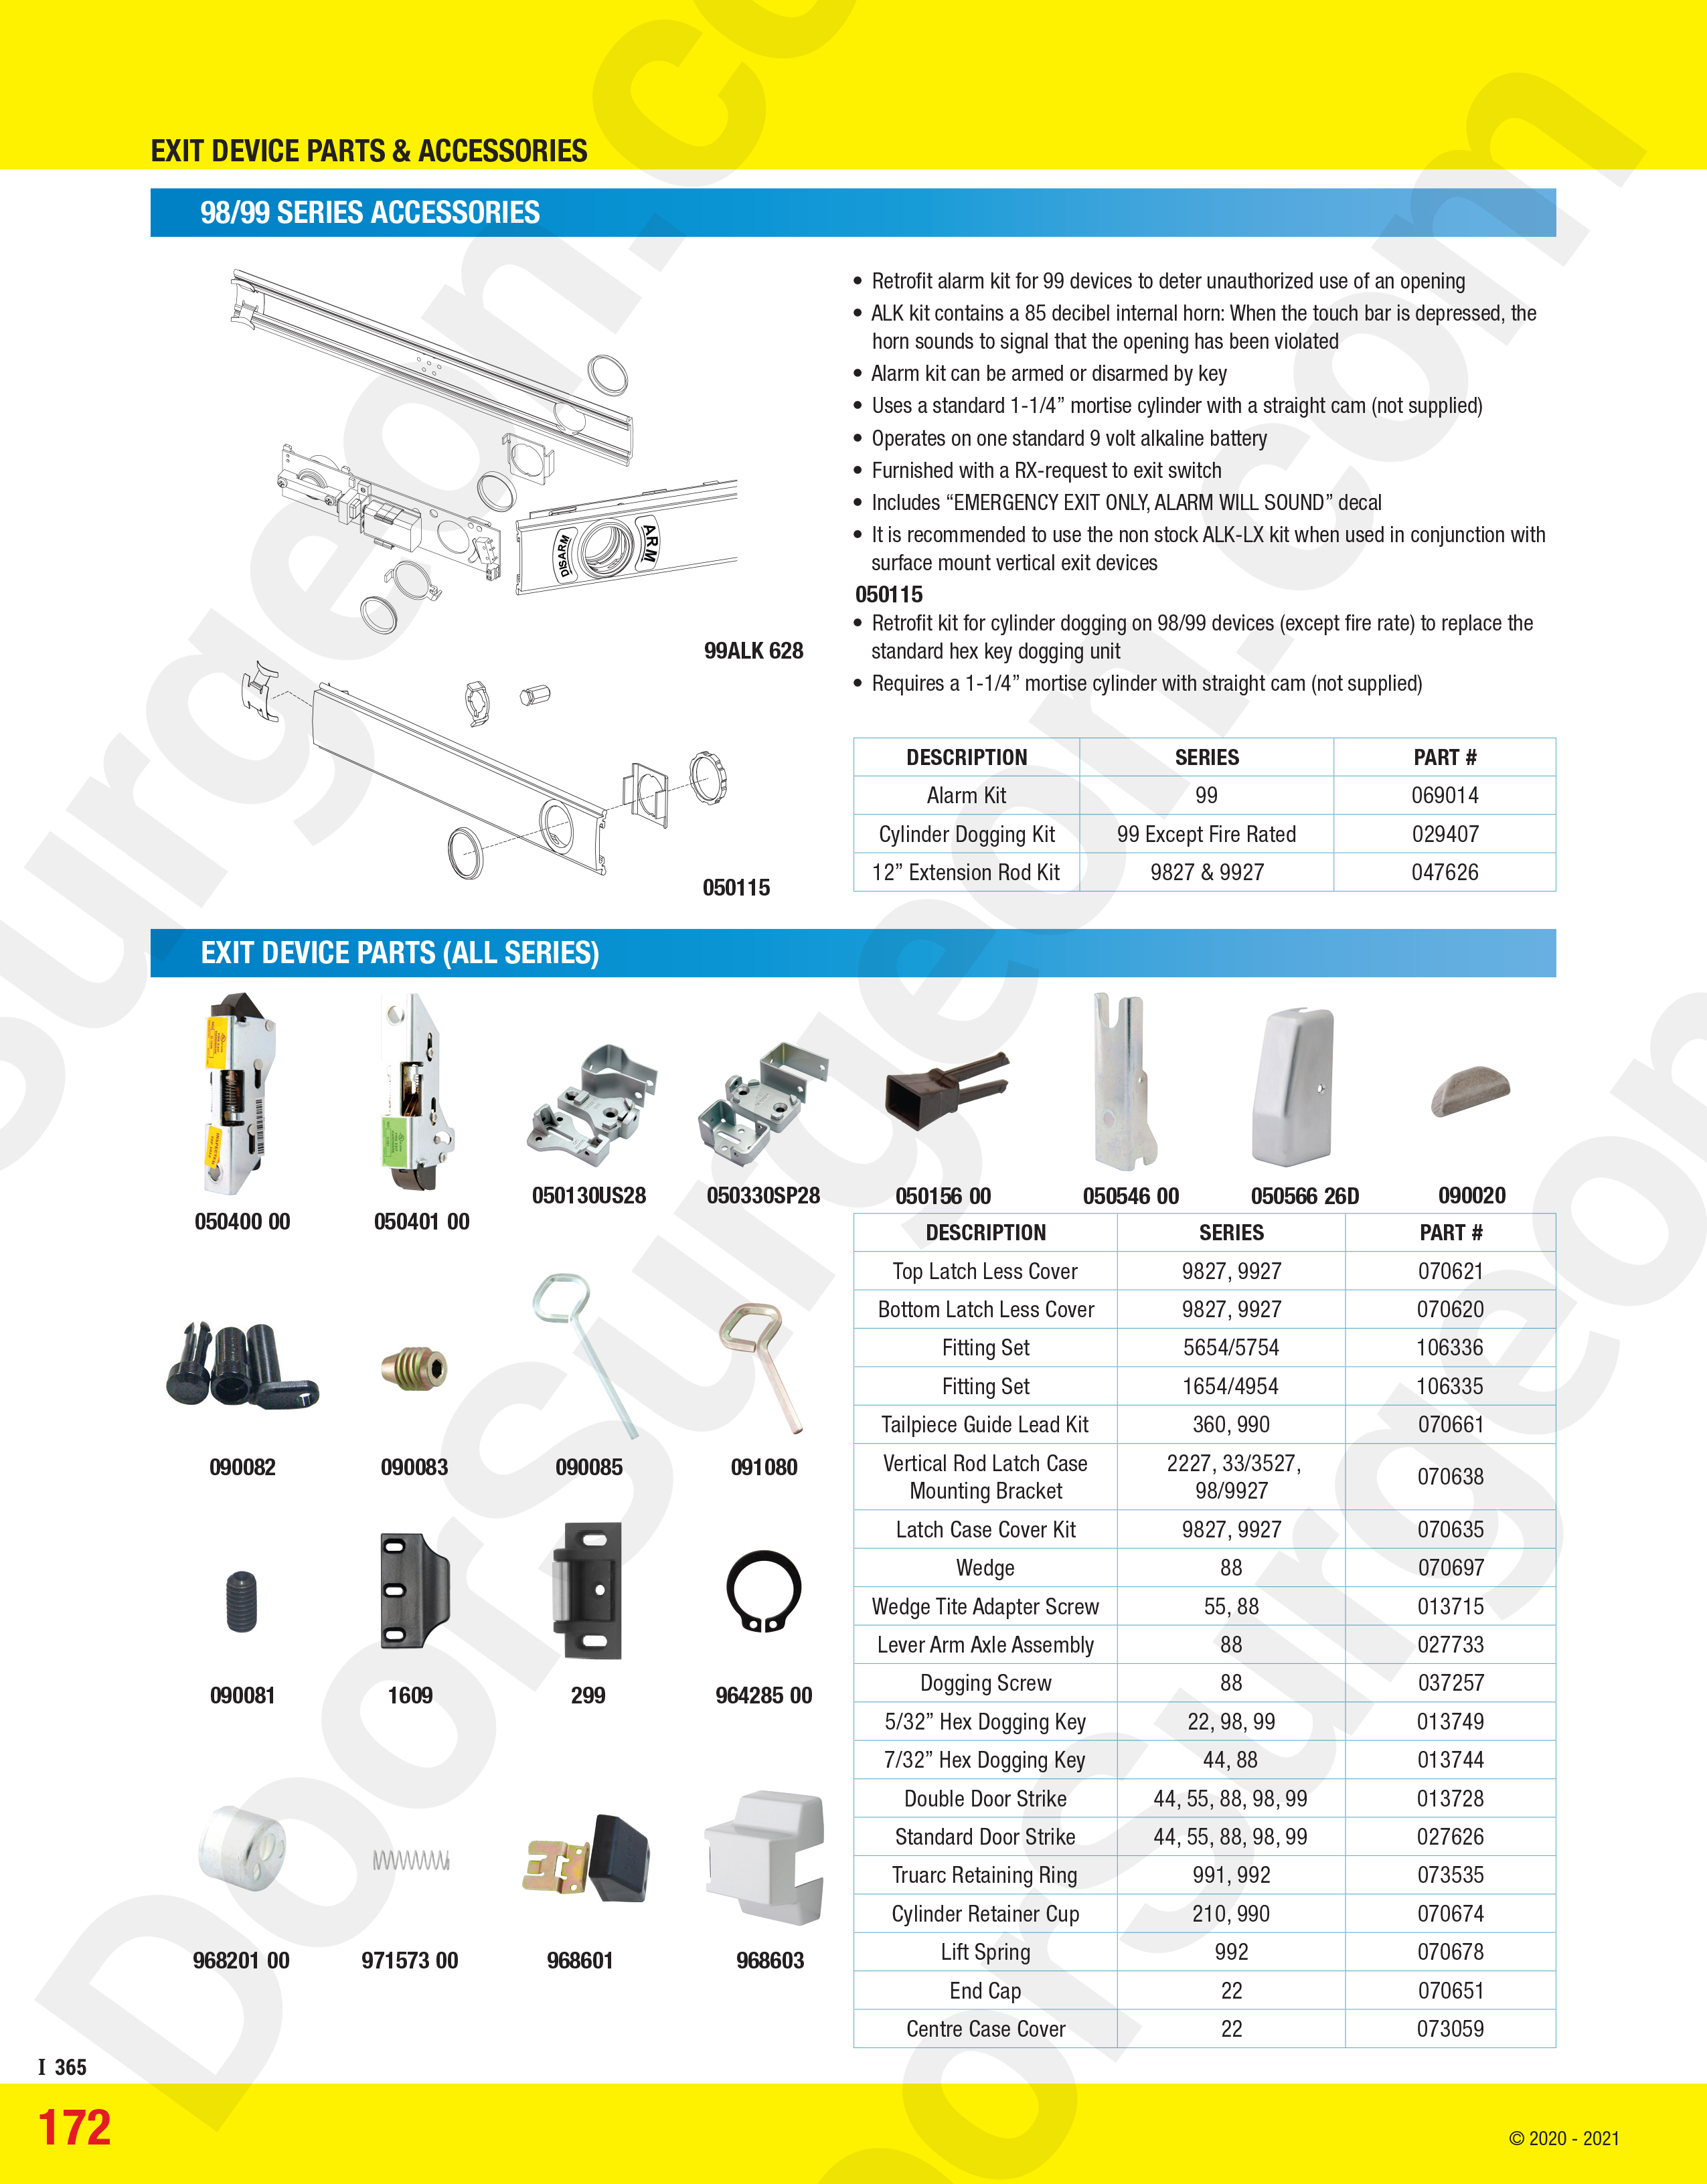 Von Duprin Panic bar exit device parts and accessories.